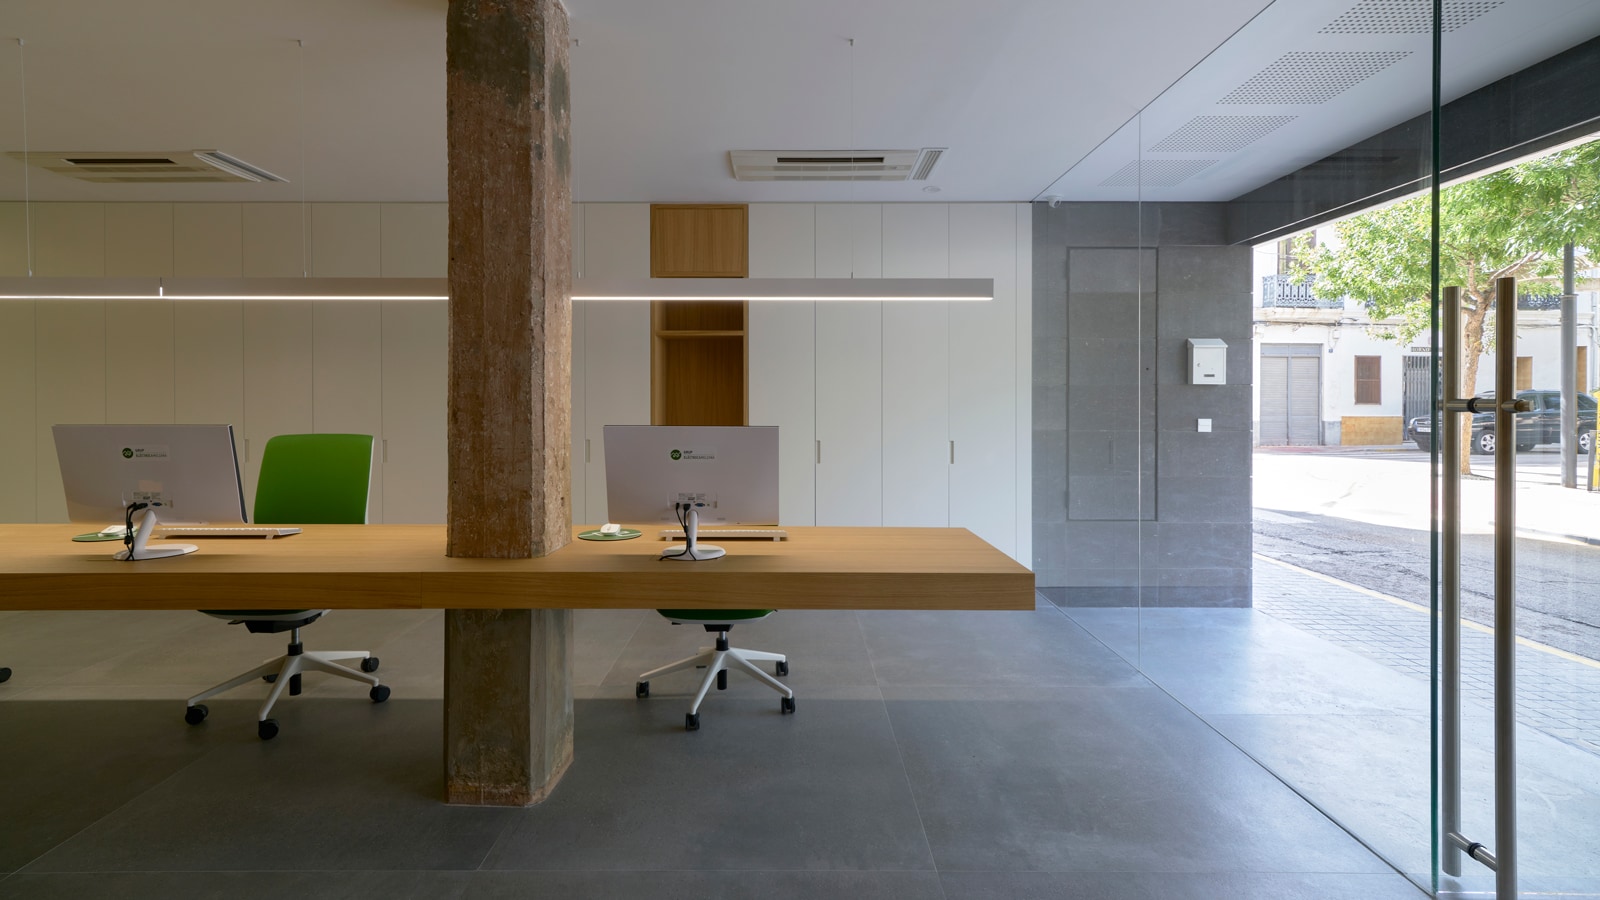 PORCELANOSA Group Projects: EM offices in Meliana: ergonomics and design  for workplace wellbeing